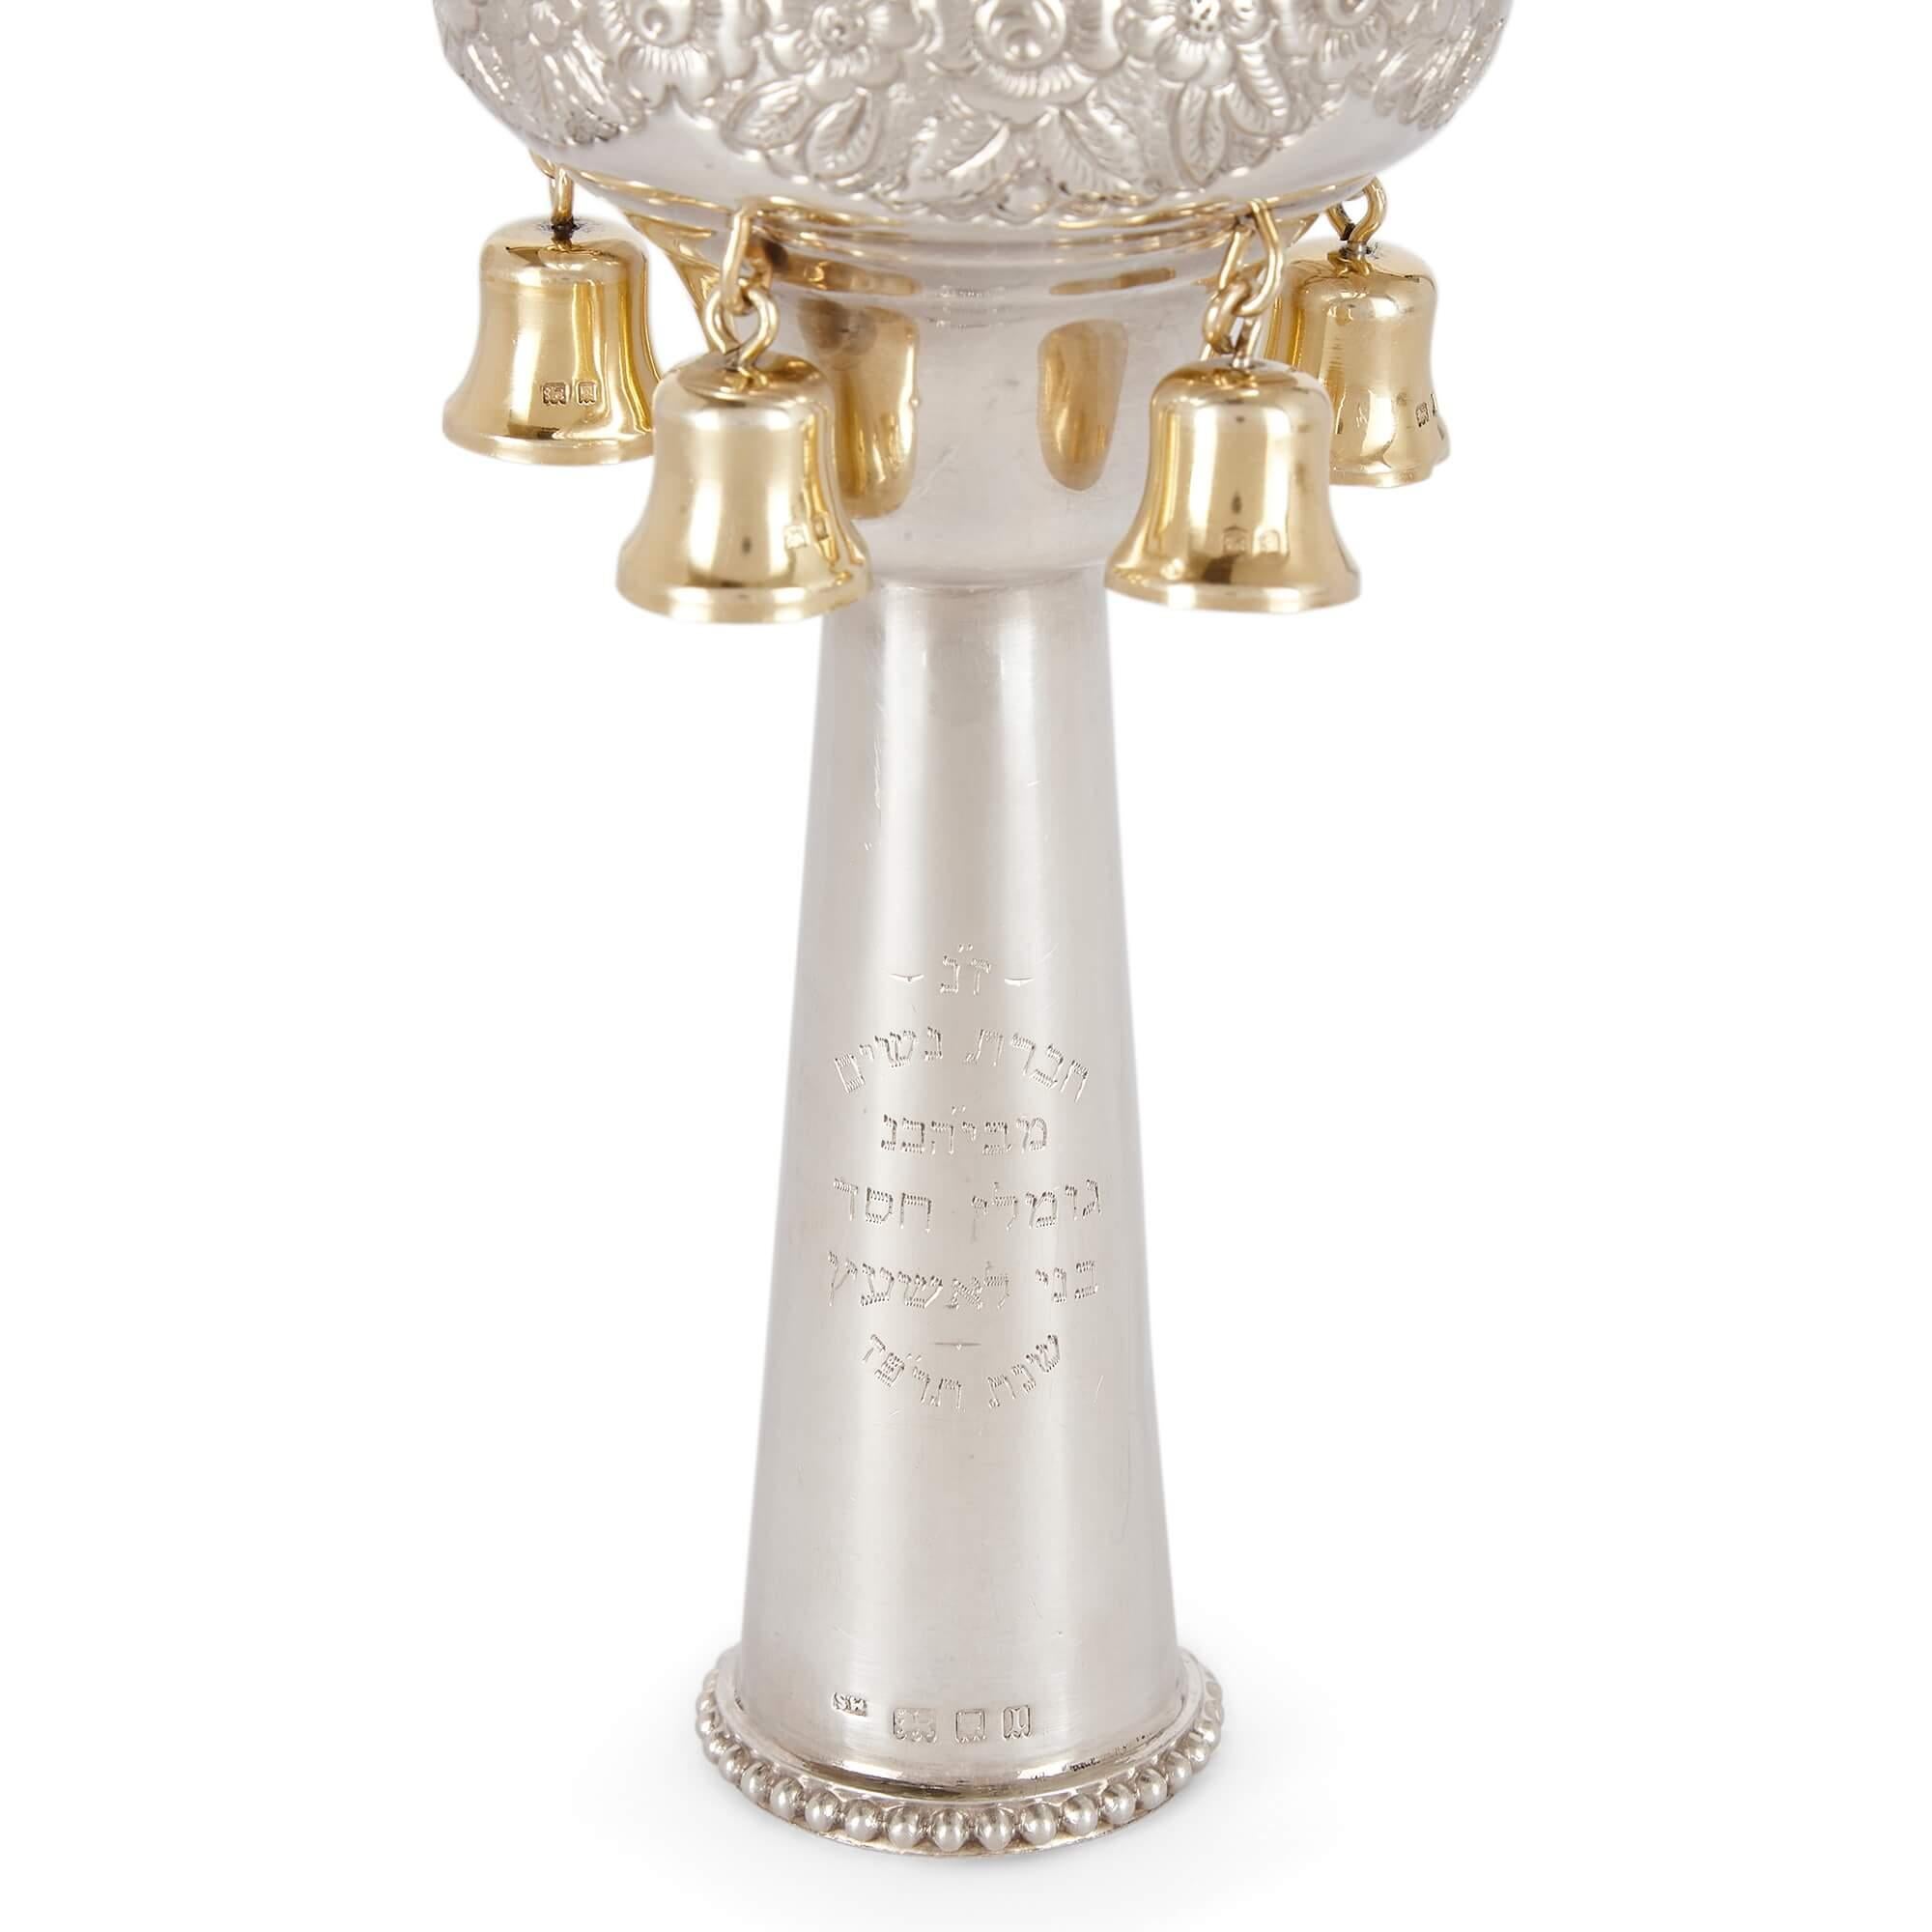 Pair of large, very fine English silver gilt Torah finials or Rimonim
London, 1926
Height 40cm, diameter 9cm

Wrought from silver and embellished with touches of silver gilt, these fine items of antique Judaica are a pair of Rimonim, Torah